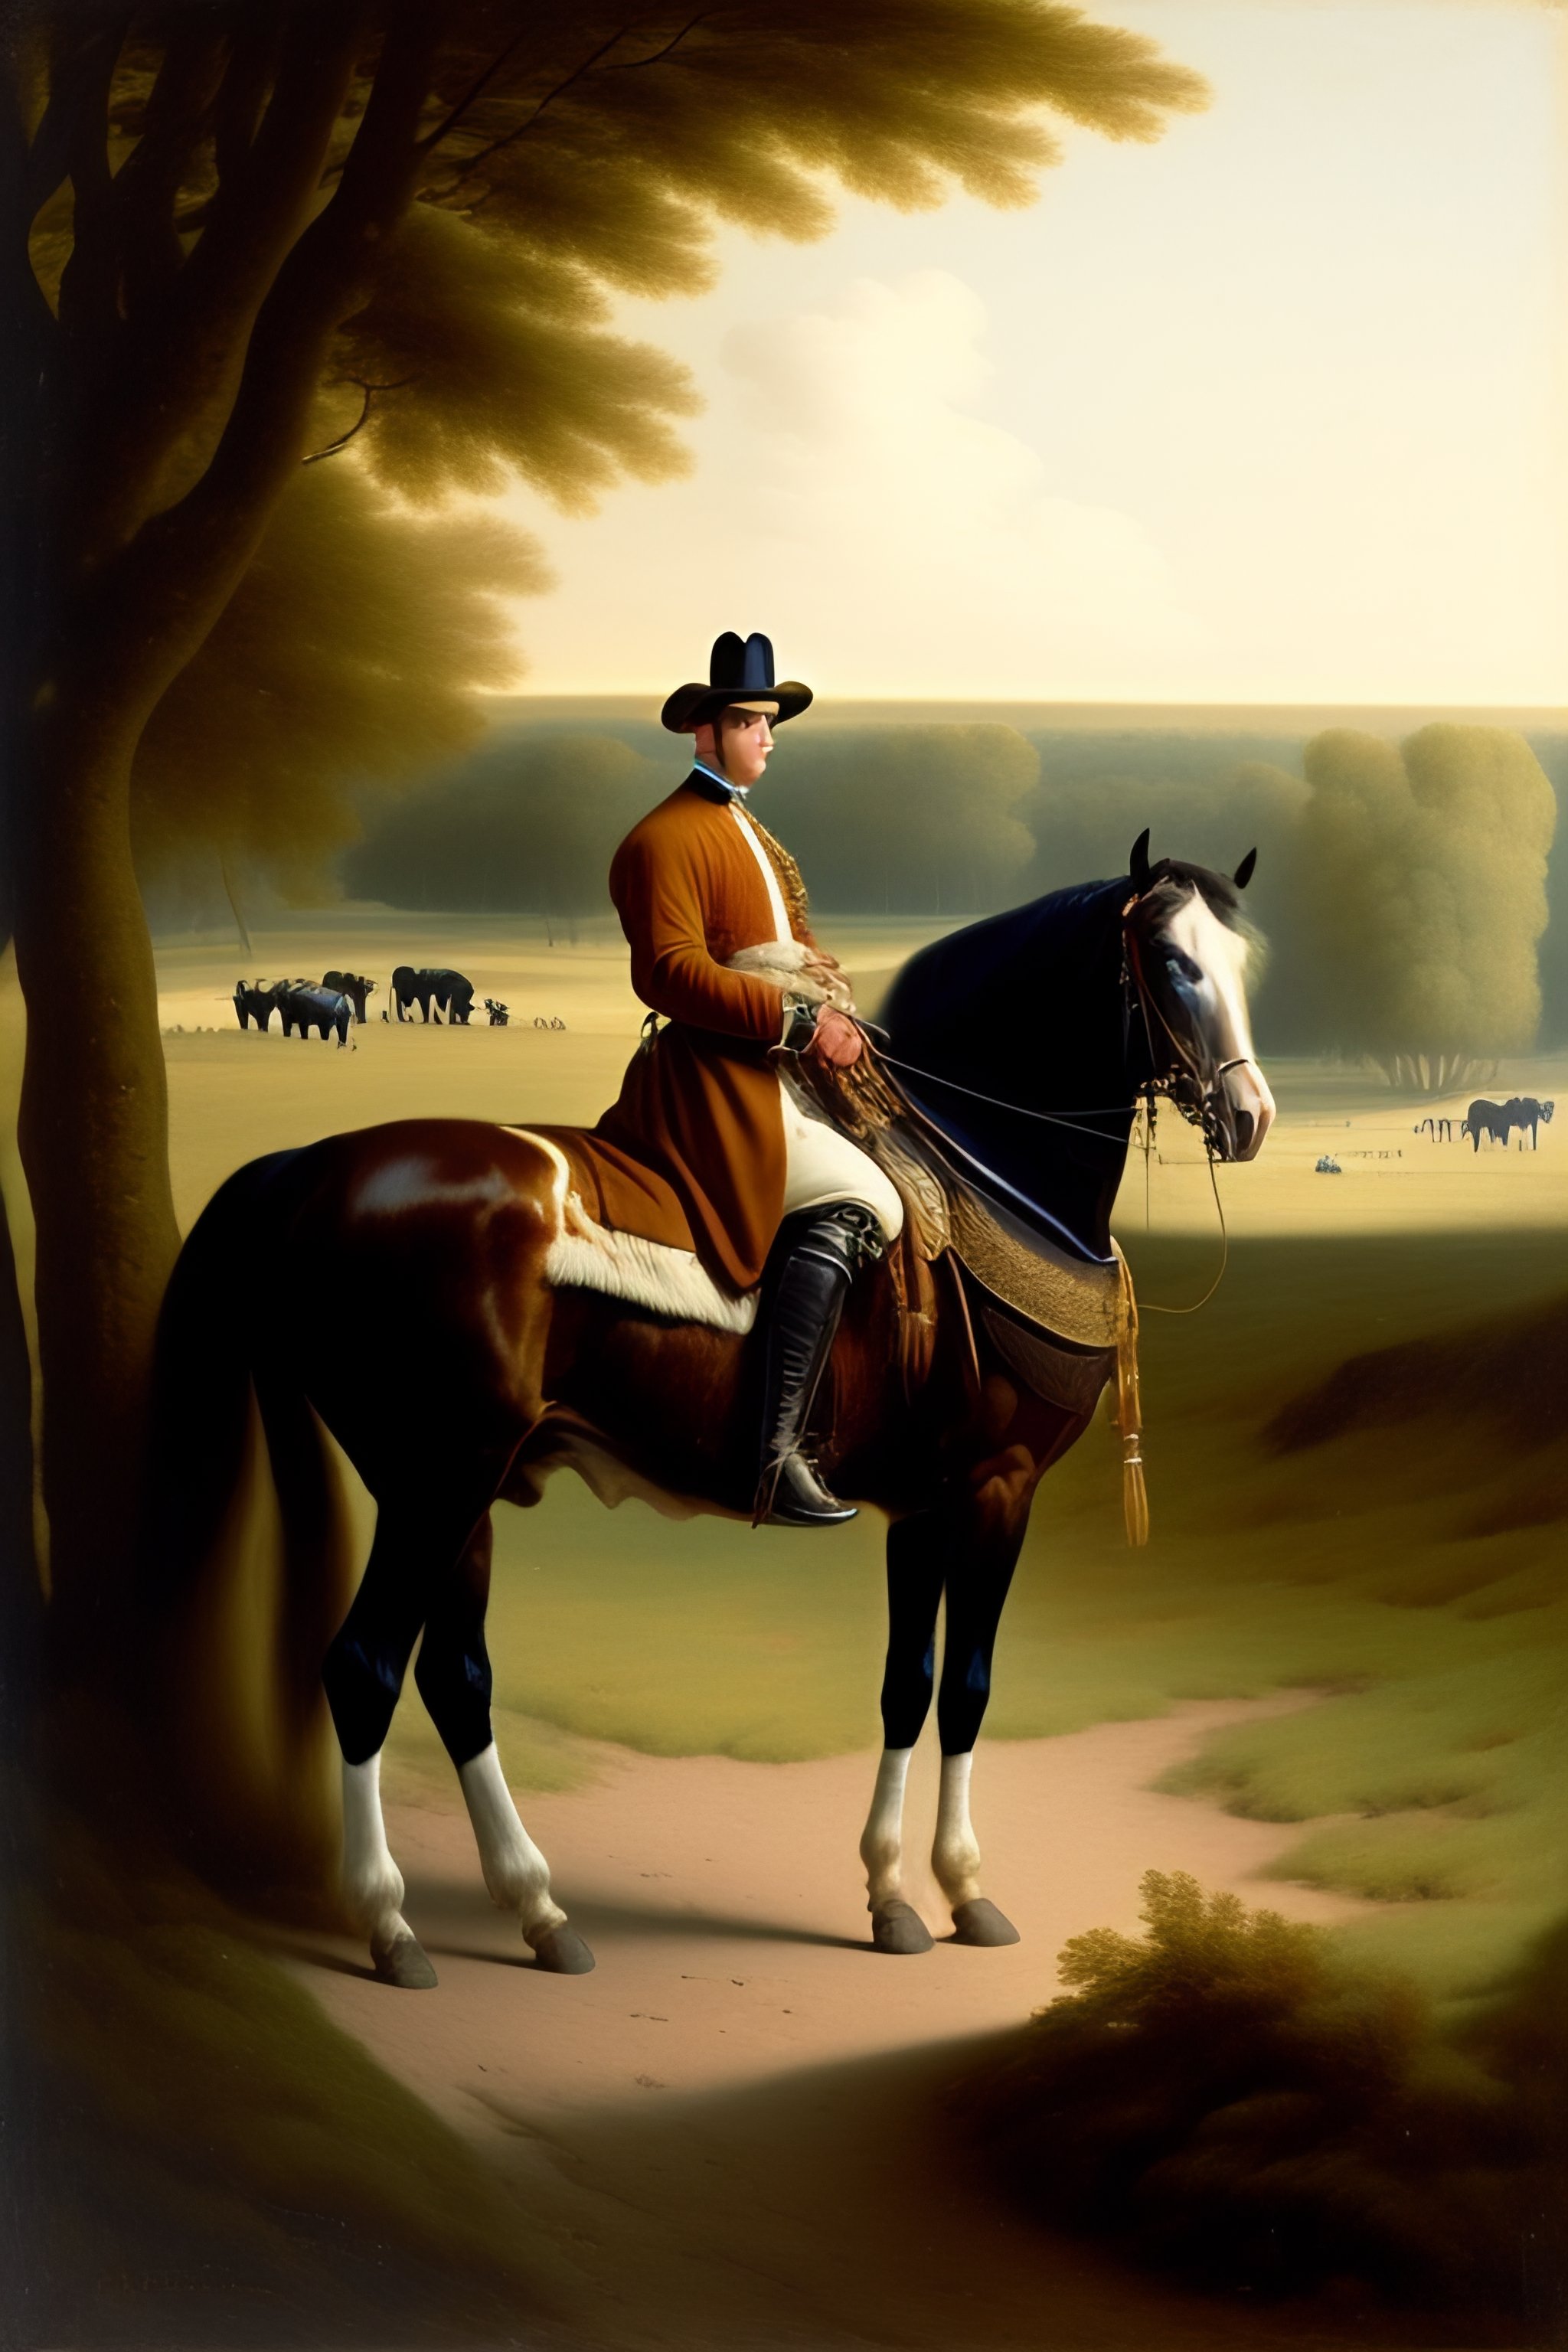 File:A gouty man surrounded by horse-riding accoutrements. Colour